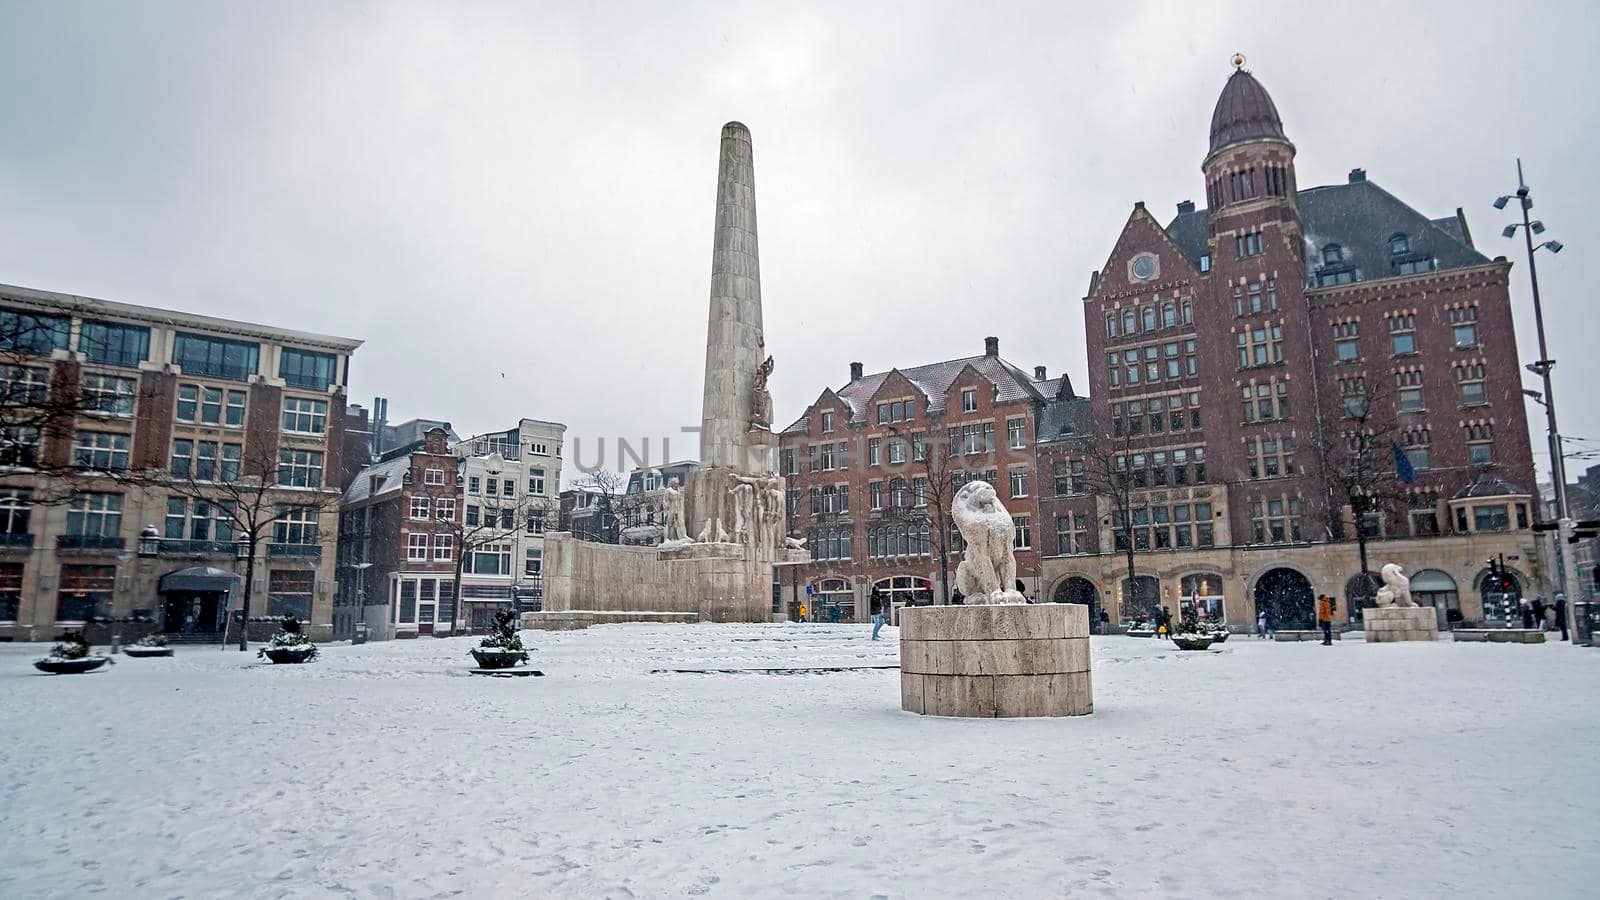 Snowy city Amsterdam at the Dam square in the Netherlands in winter by devy